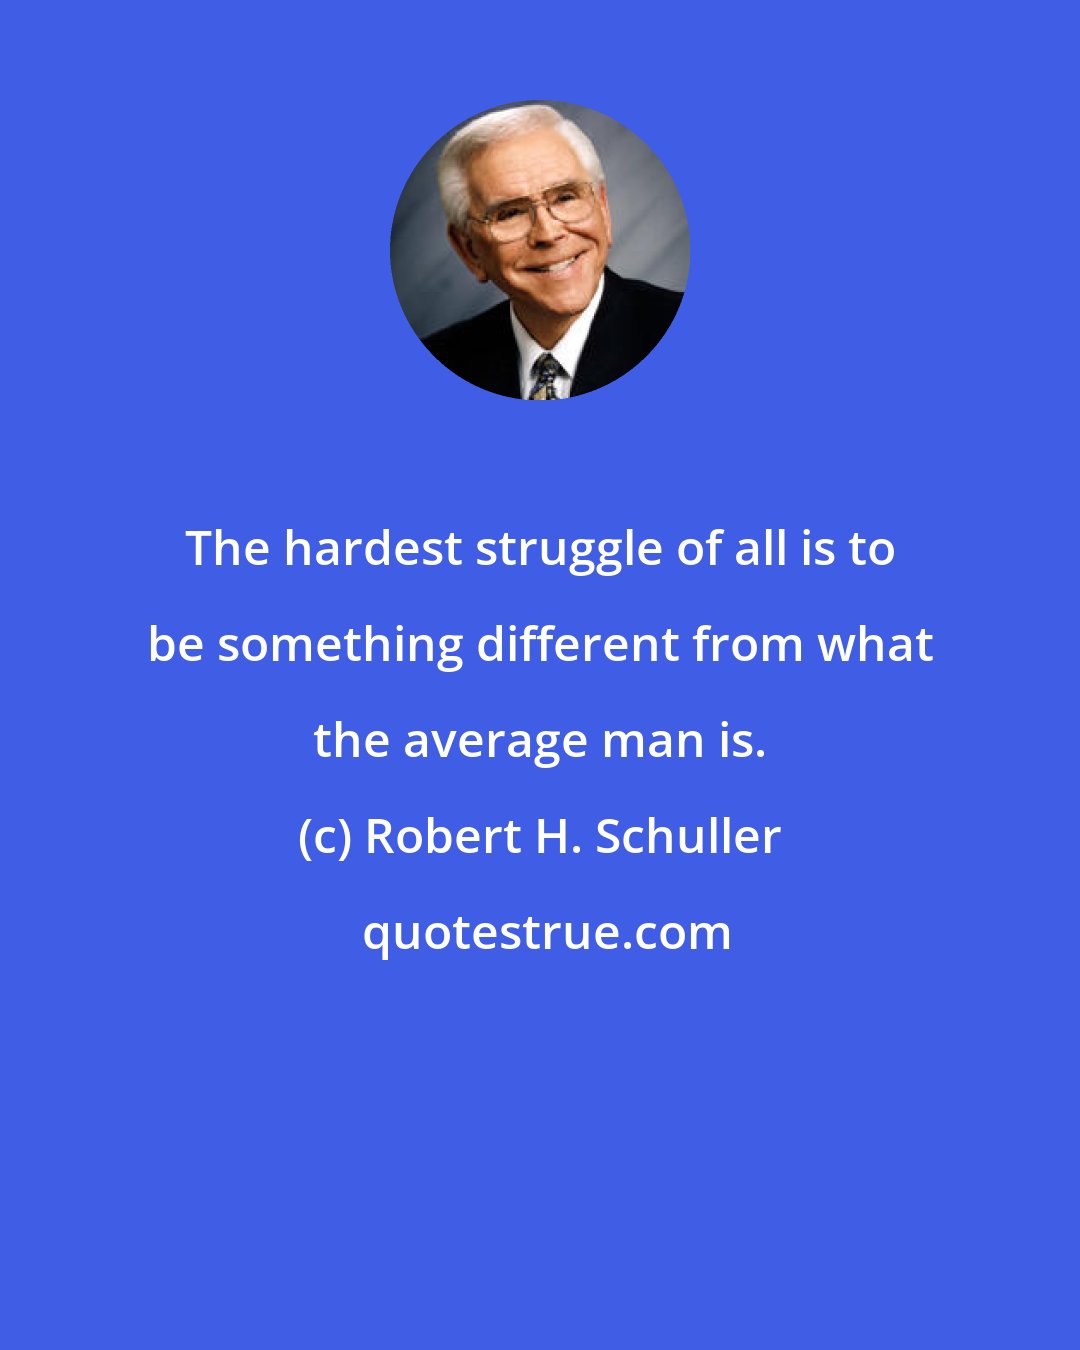 Robert H. Schuller: The hardest struggle of all is to be something different from what the average man is.